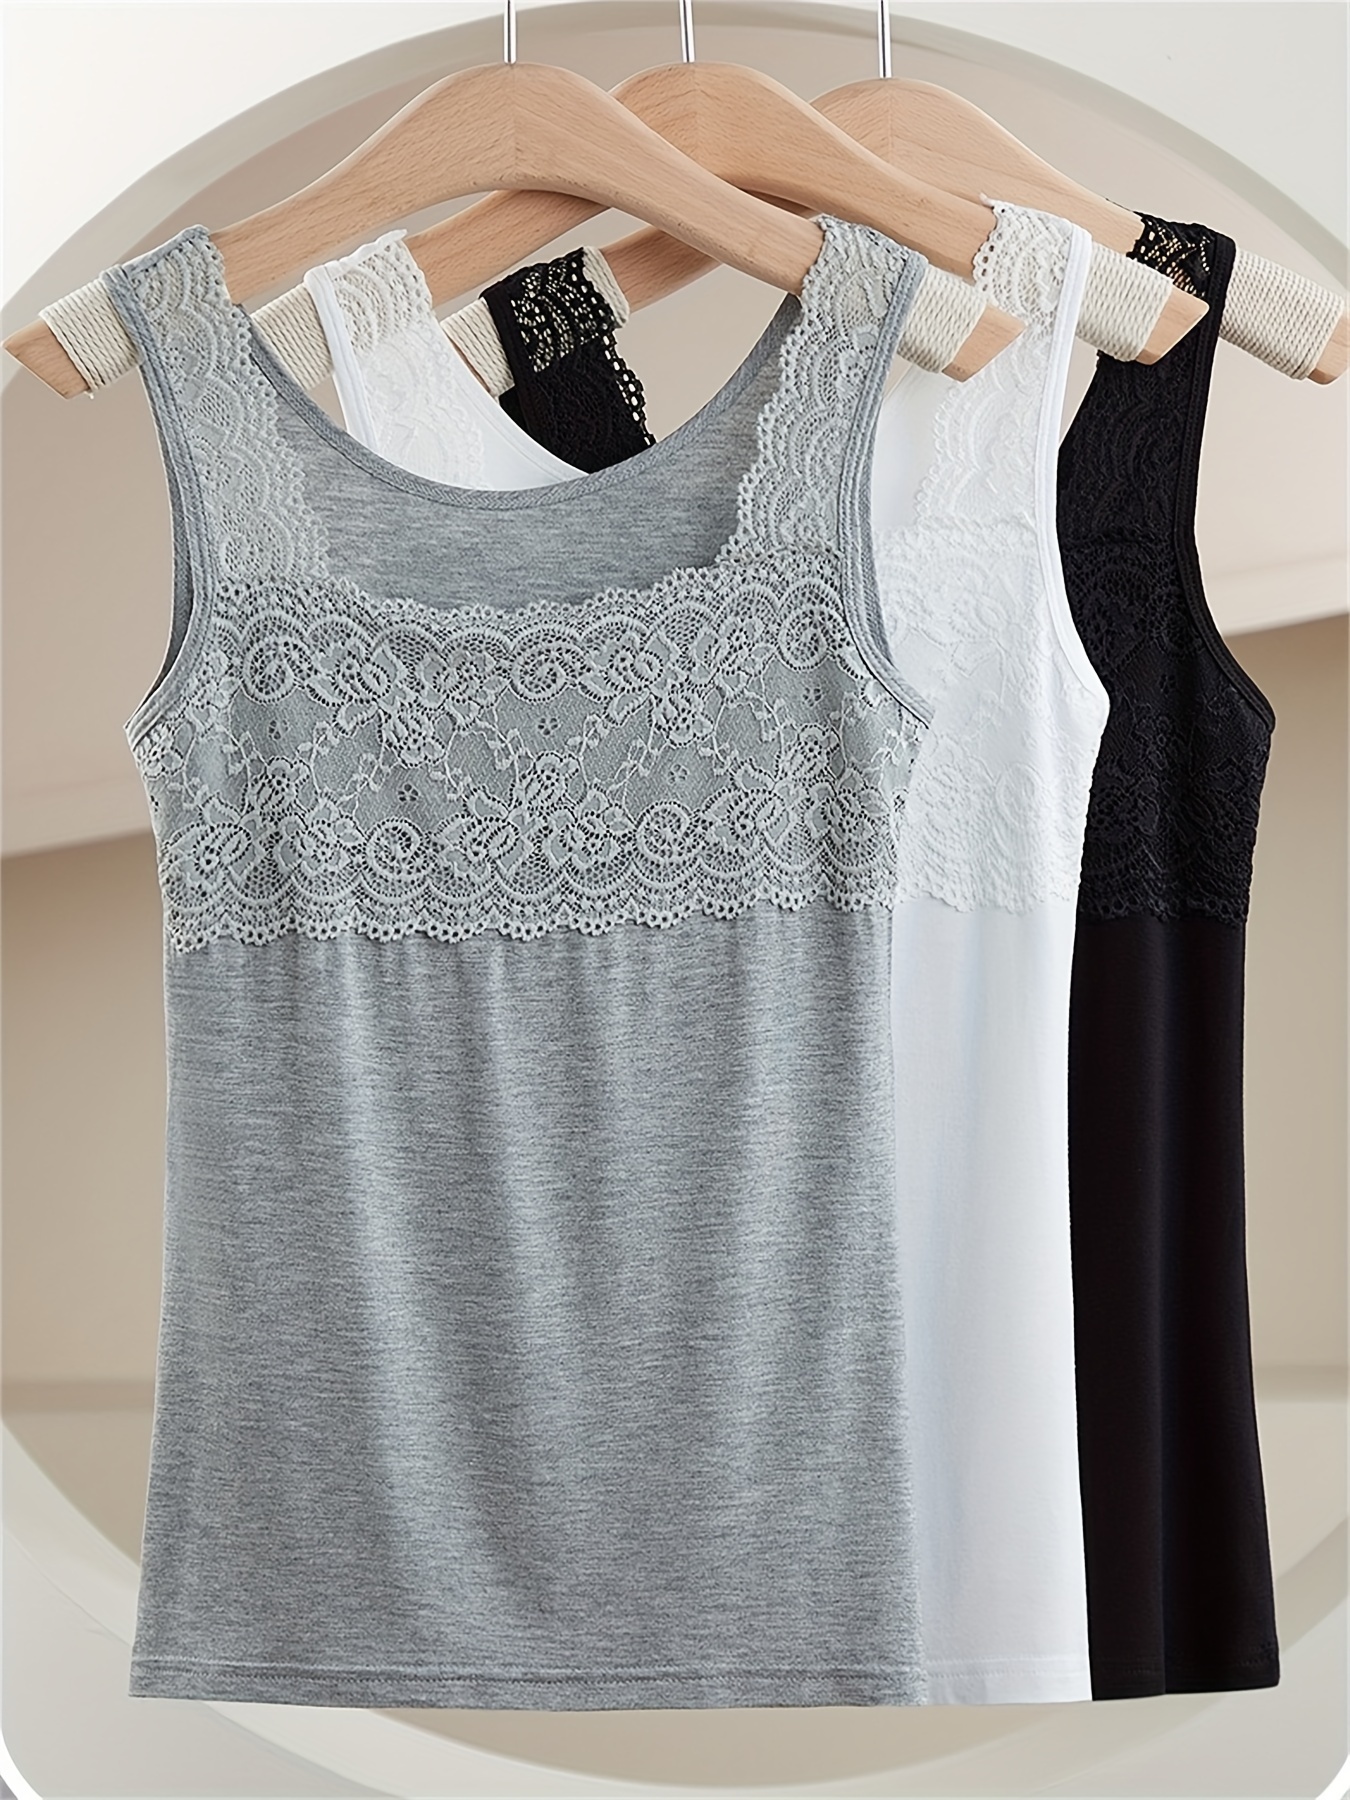 Lace Trim Solid Cami Top, Sexy Backless V Neck Summer Sleeveless Top,  Women's Clothing